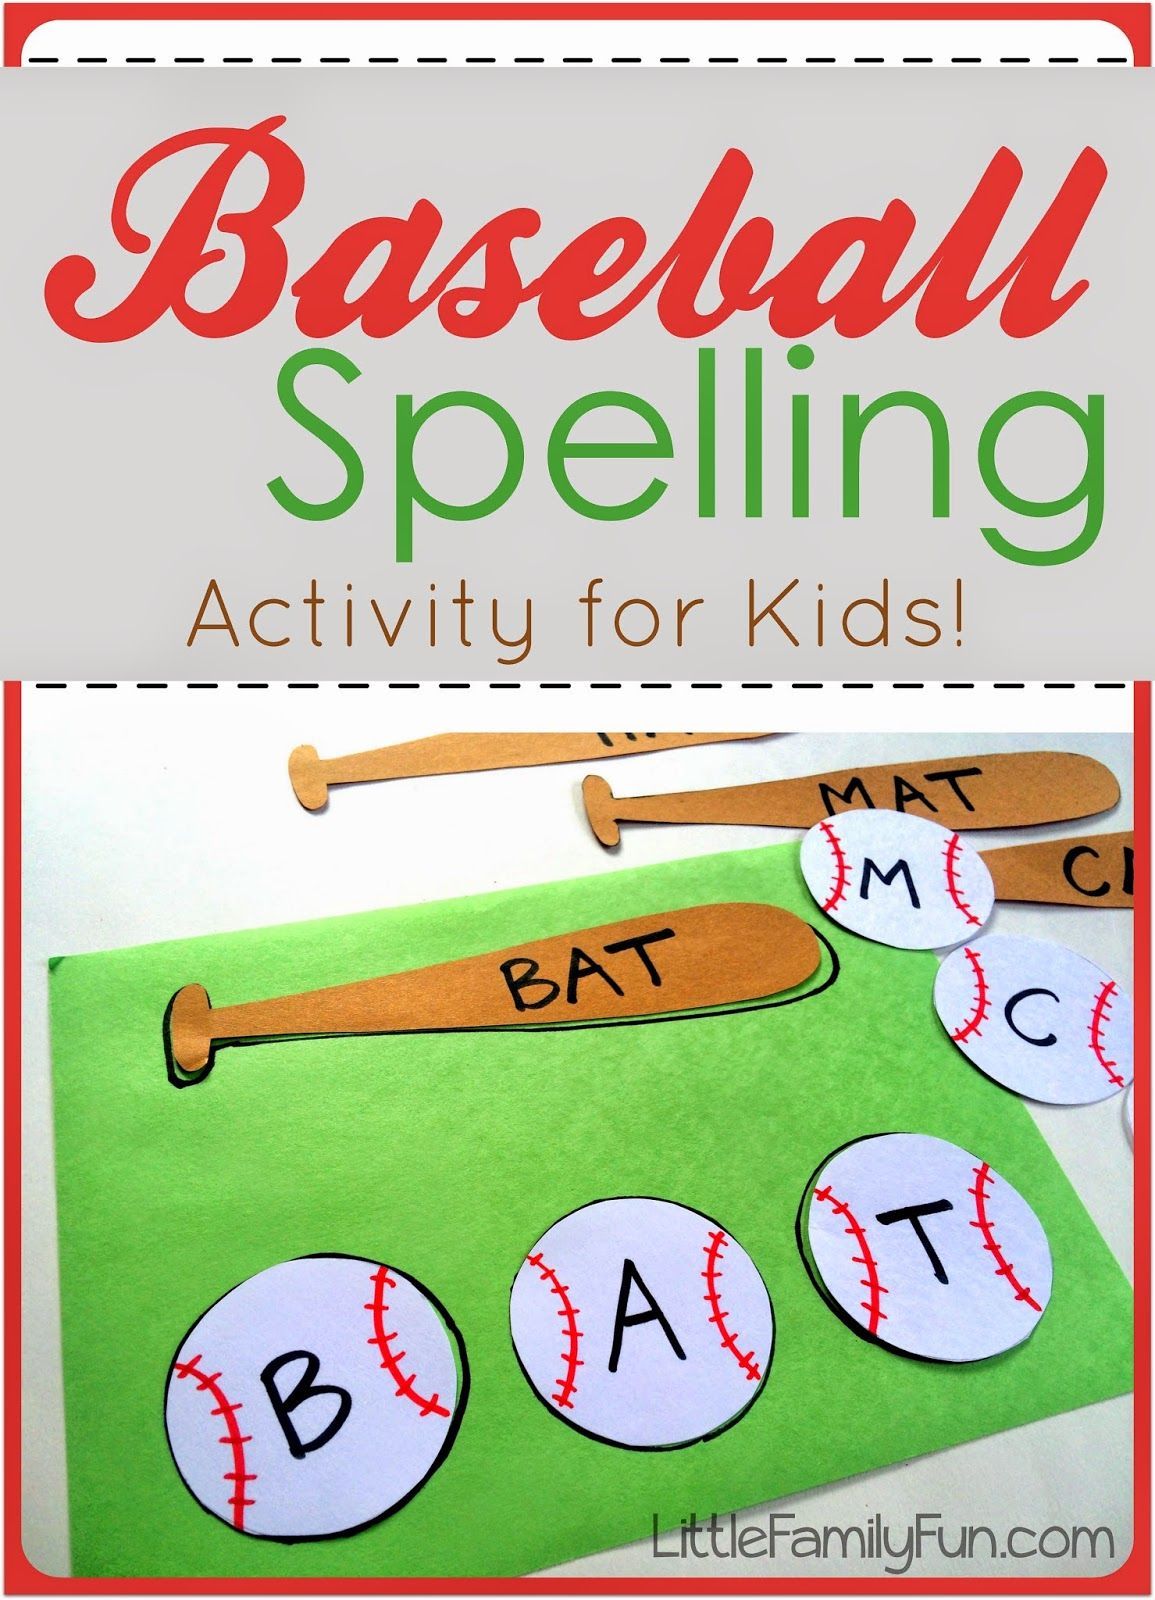 A cute & easy way to practice letters, spelling & reading with kids! And SO FUN!! (Make using lowercase letters!)